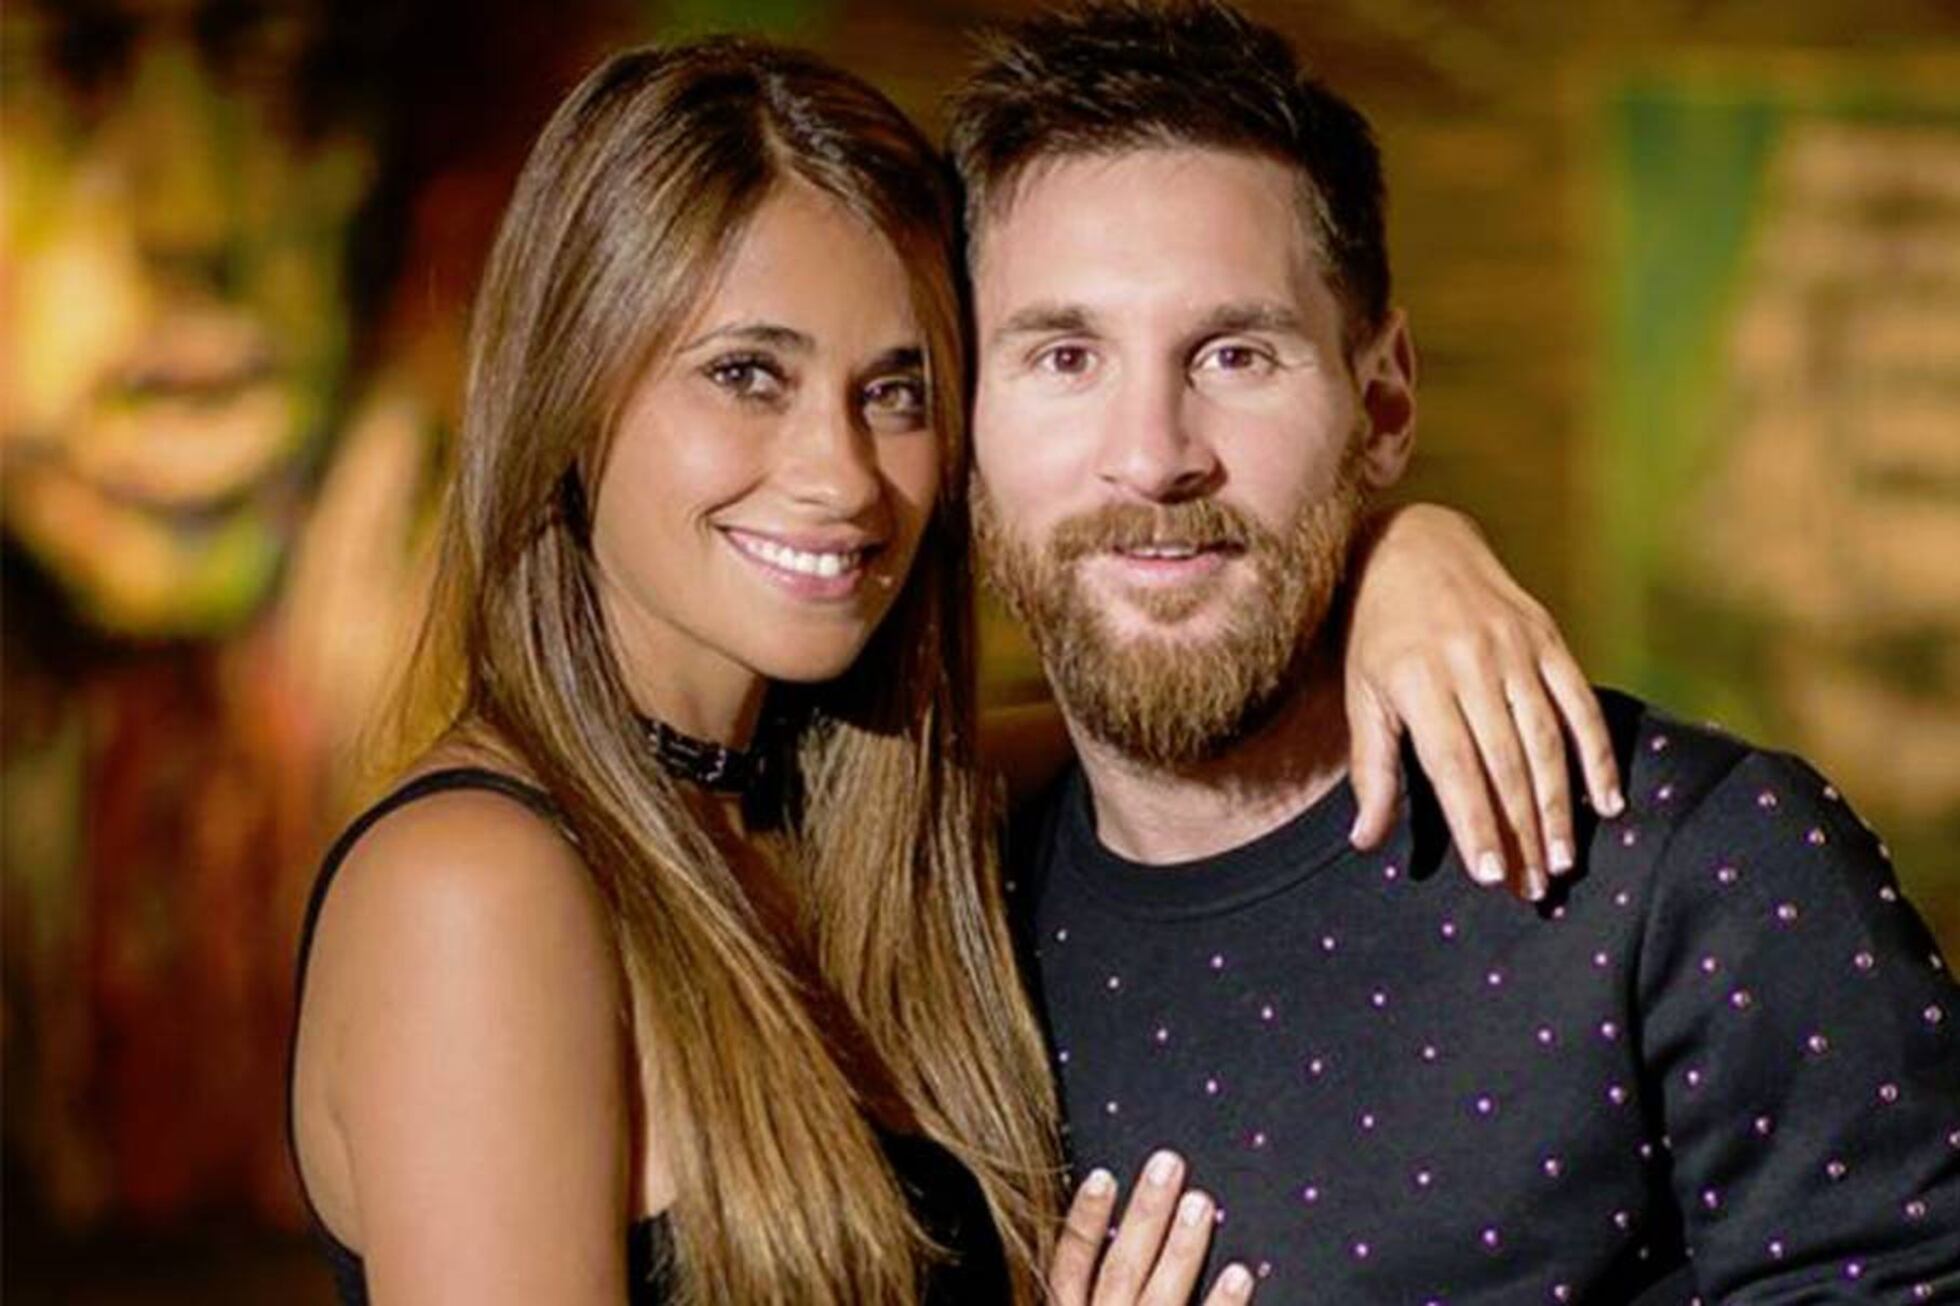 Messi is unfaithful to his wife Antonela Roccuzzo? What the rumors say about the PSG's star